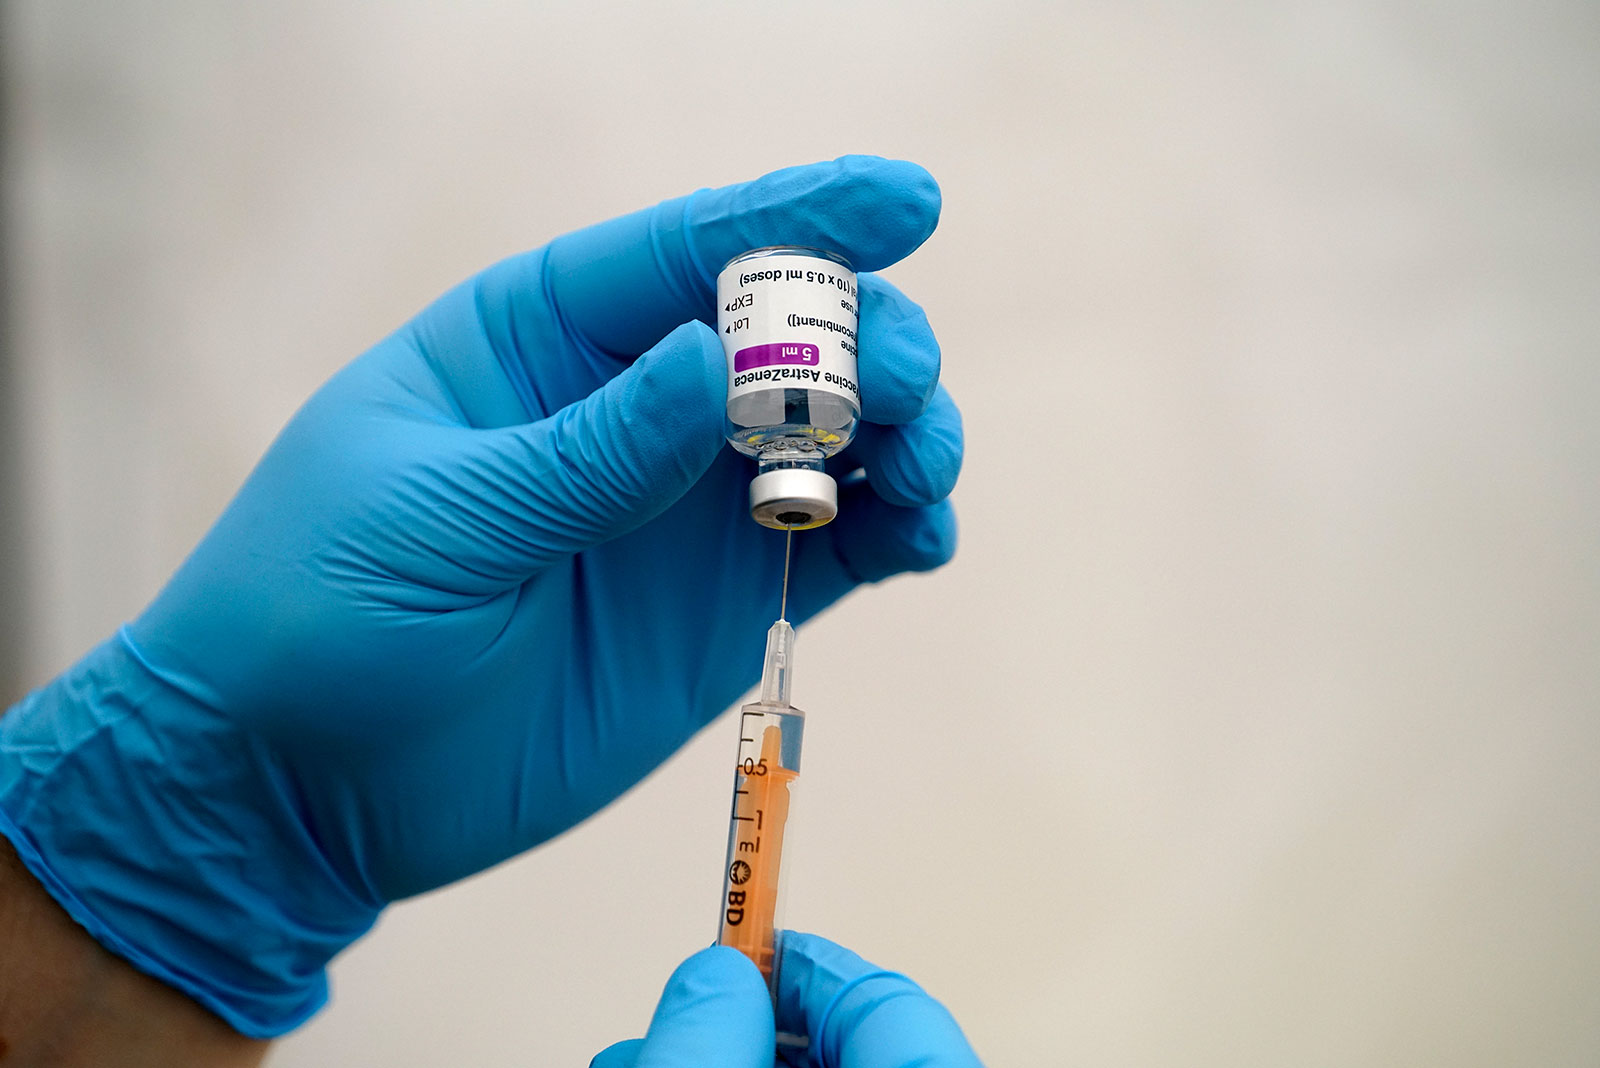 An NHS member prepares a dose of the AstraZeneca Covid-19 vaccine at Stithians Showground near Truro, England, on January 26.